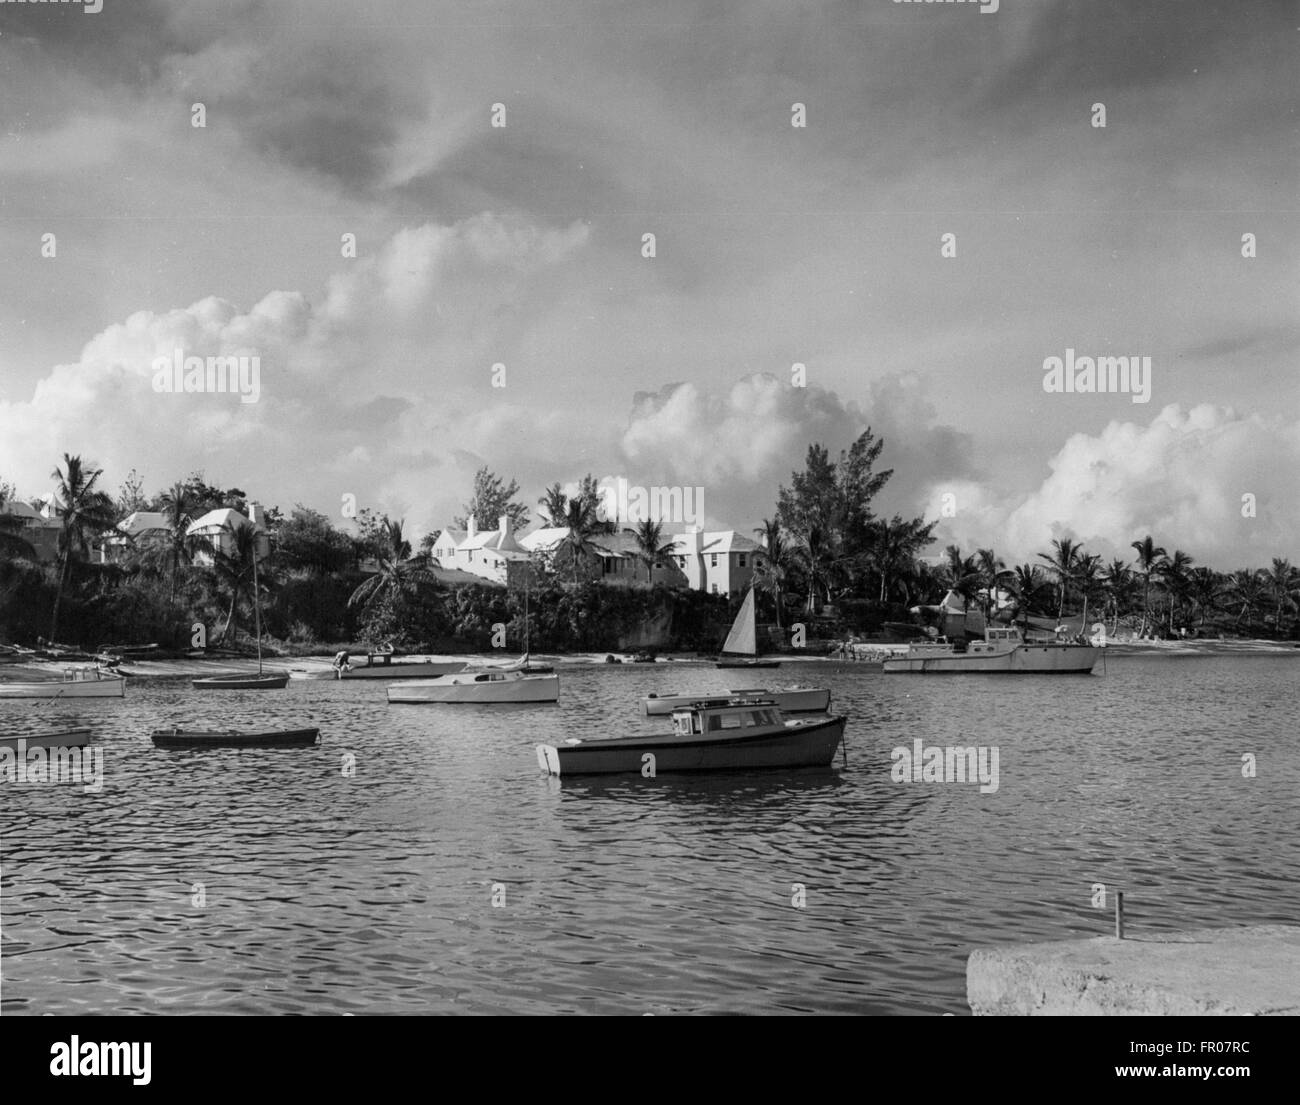 Mangrove Bay, Bermuda. 23rd Nov, 1953. This is the view from Mangrove Bay Wharf which Her Majesty Queen Elizabeth and His Royal Highness the Duke of Edinburgh will have after they disembark from the yacht 'Wilhelmina' at the conclusion of a cruise through the islands of Bermuda's Great Sound. In the background can be seen well-known Cambridge Beaches, a fashionable cottage colony. After a brief drive through the village of Somerset the Royal Couple will return by motor by Government House to attend a garden party held in their honor. © KEYSTONE Pictures/ZUMAPRESS.com/Alamy Live News Stock Photo